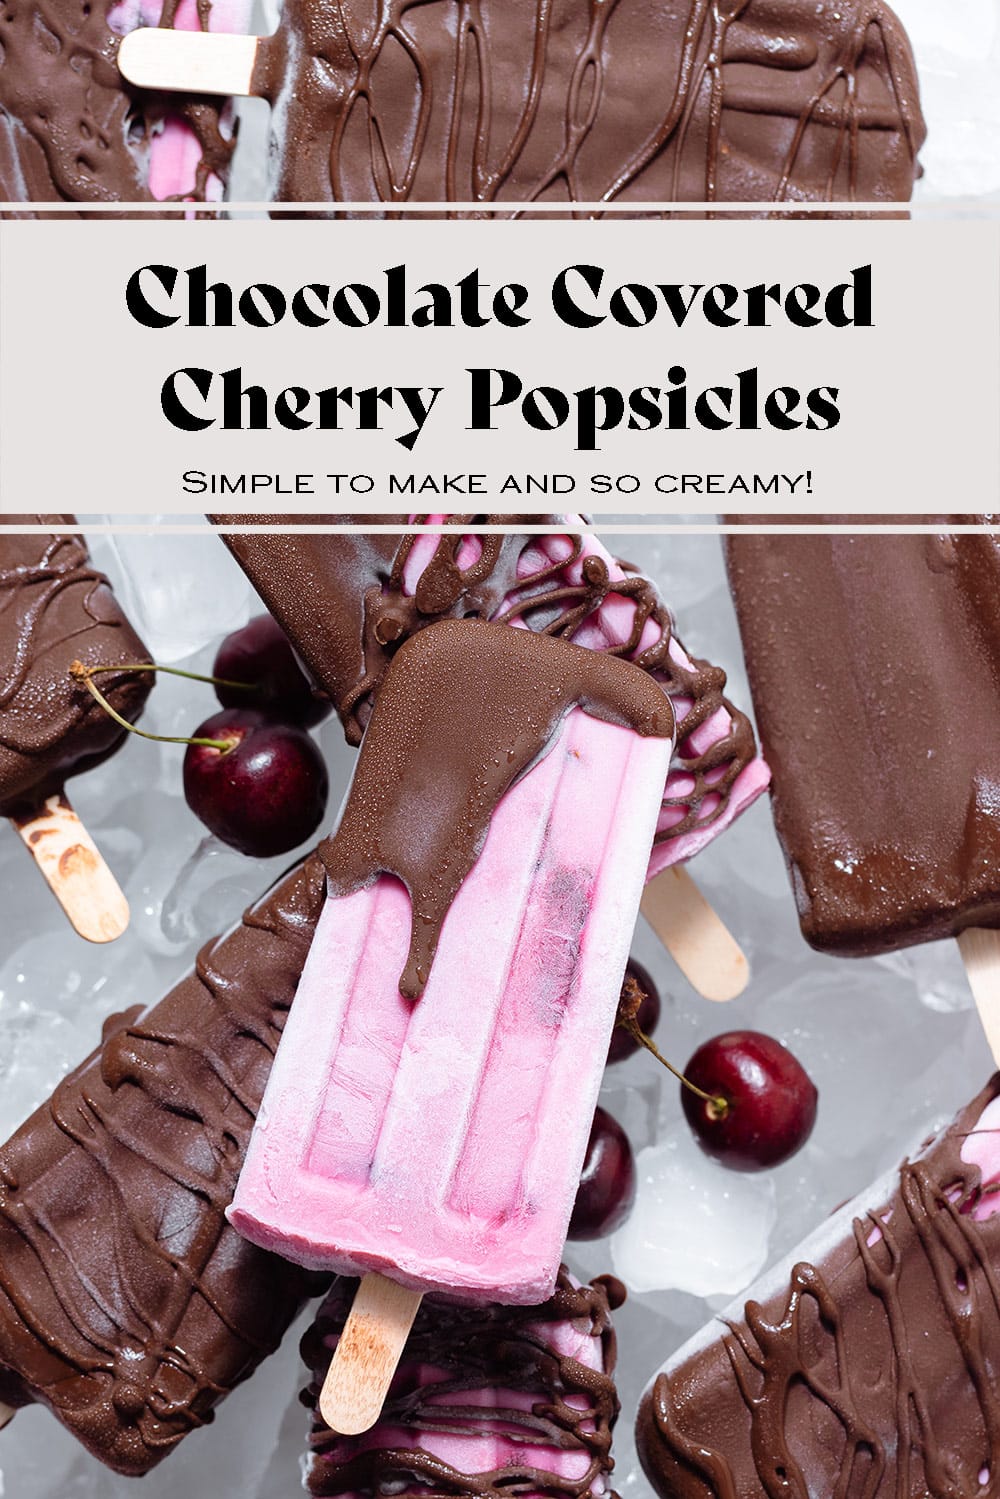 Chocolate Covered Cherry Popsicles